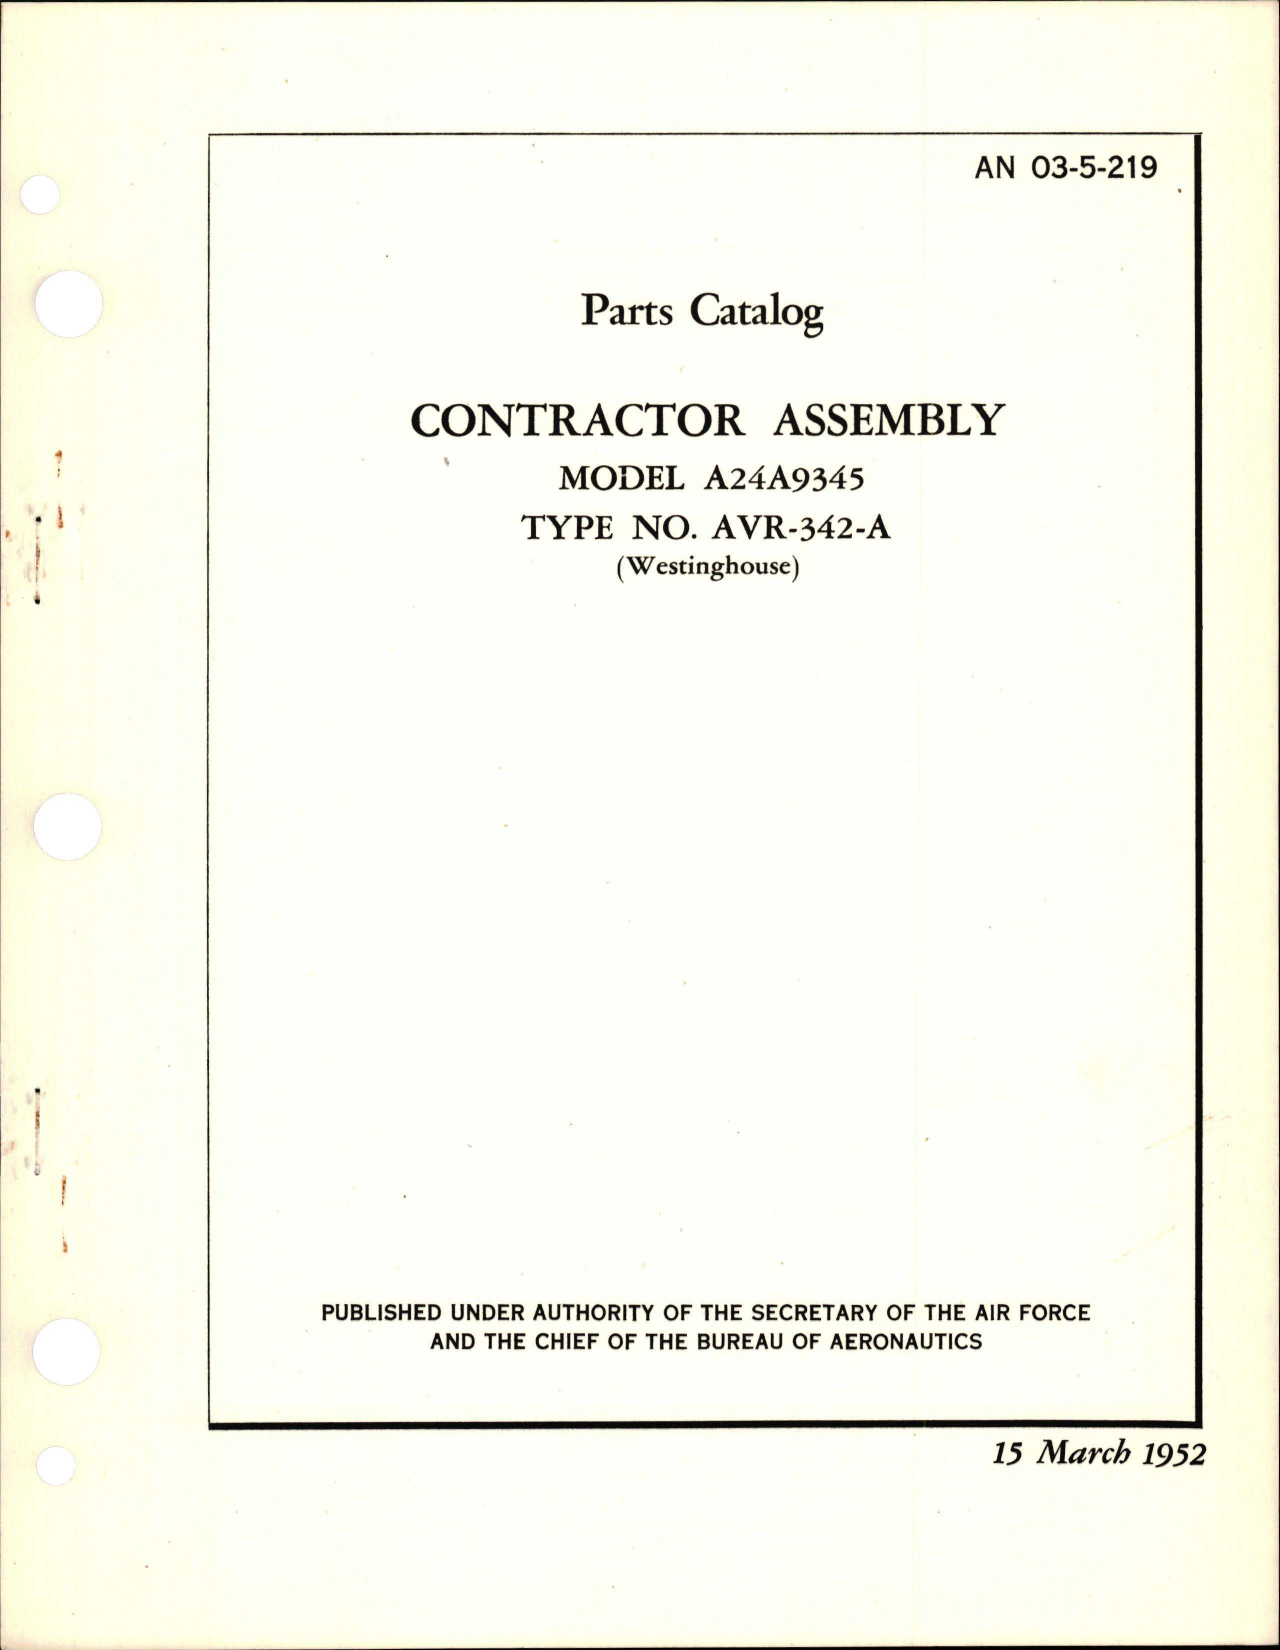 Sample page 1 from AirCorps Library document: Parts Catalog for Contractor Assembly - Model A24A9345 - Type AVR-342-A 